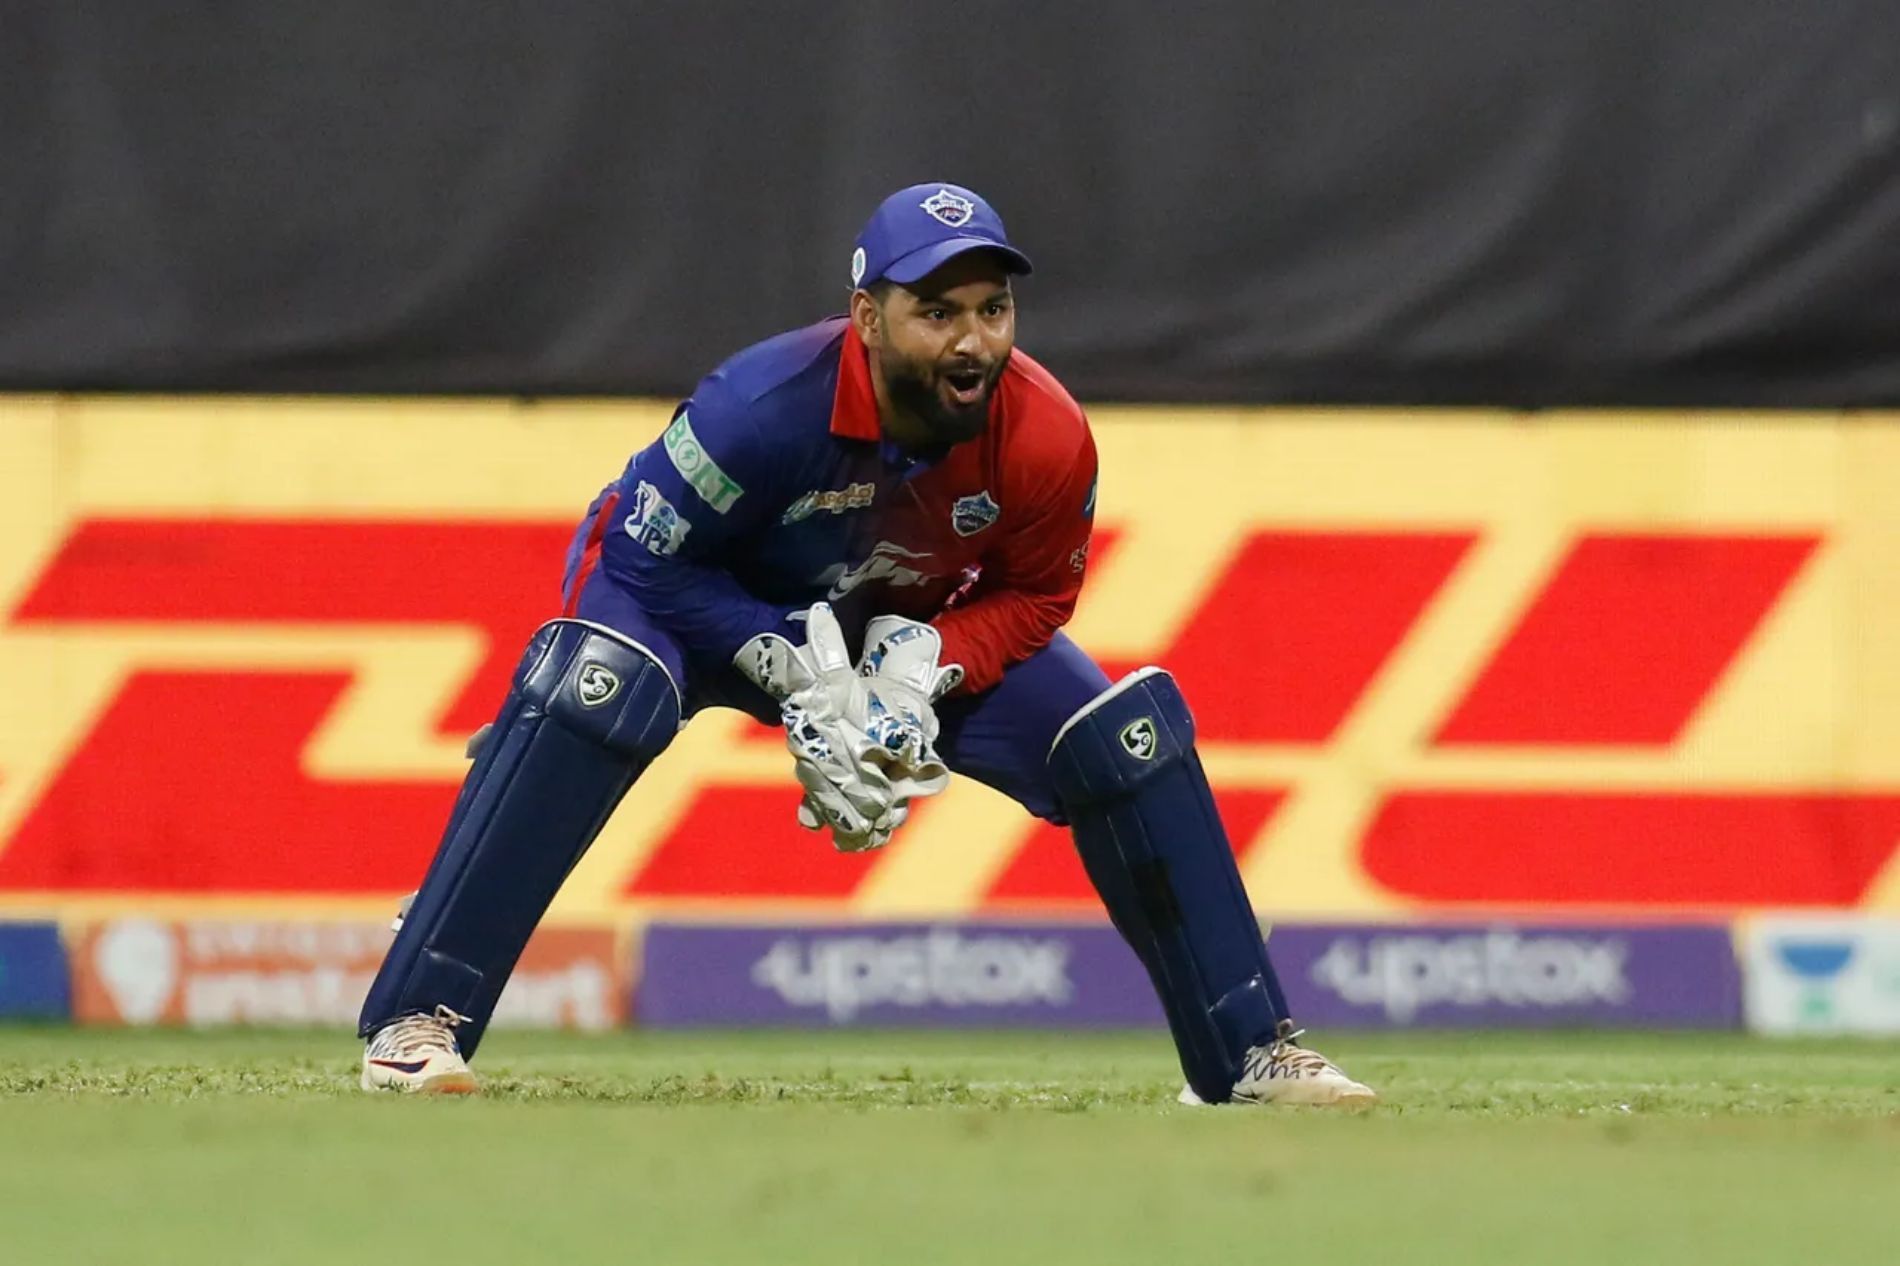 Rishabh Pant will miss IPL 2023 due to injuries suffered in a horrific accident. [P/C: BCCI]